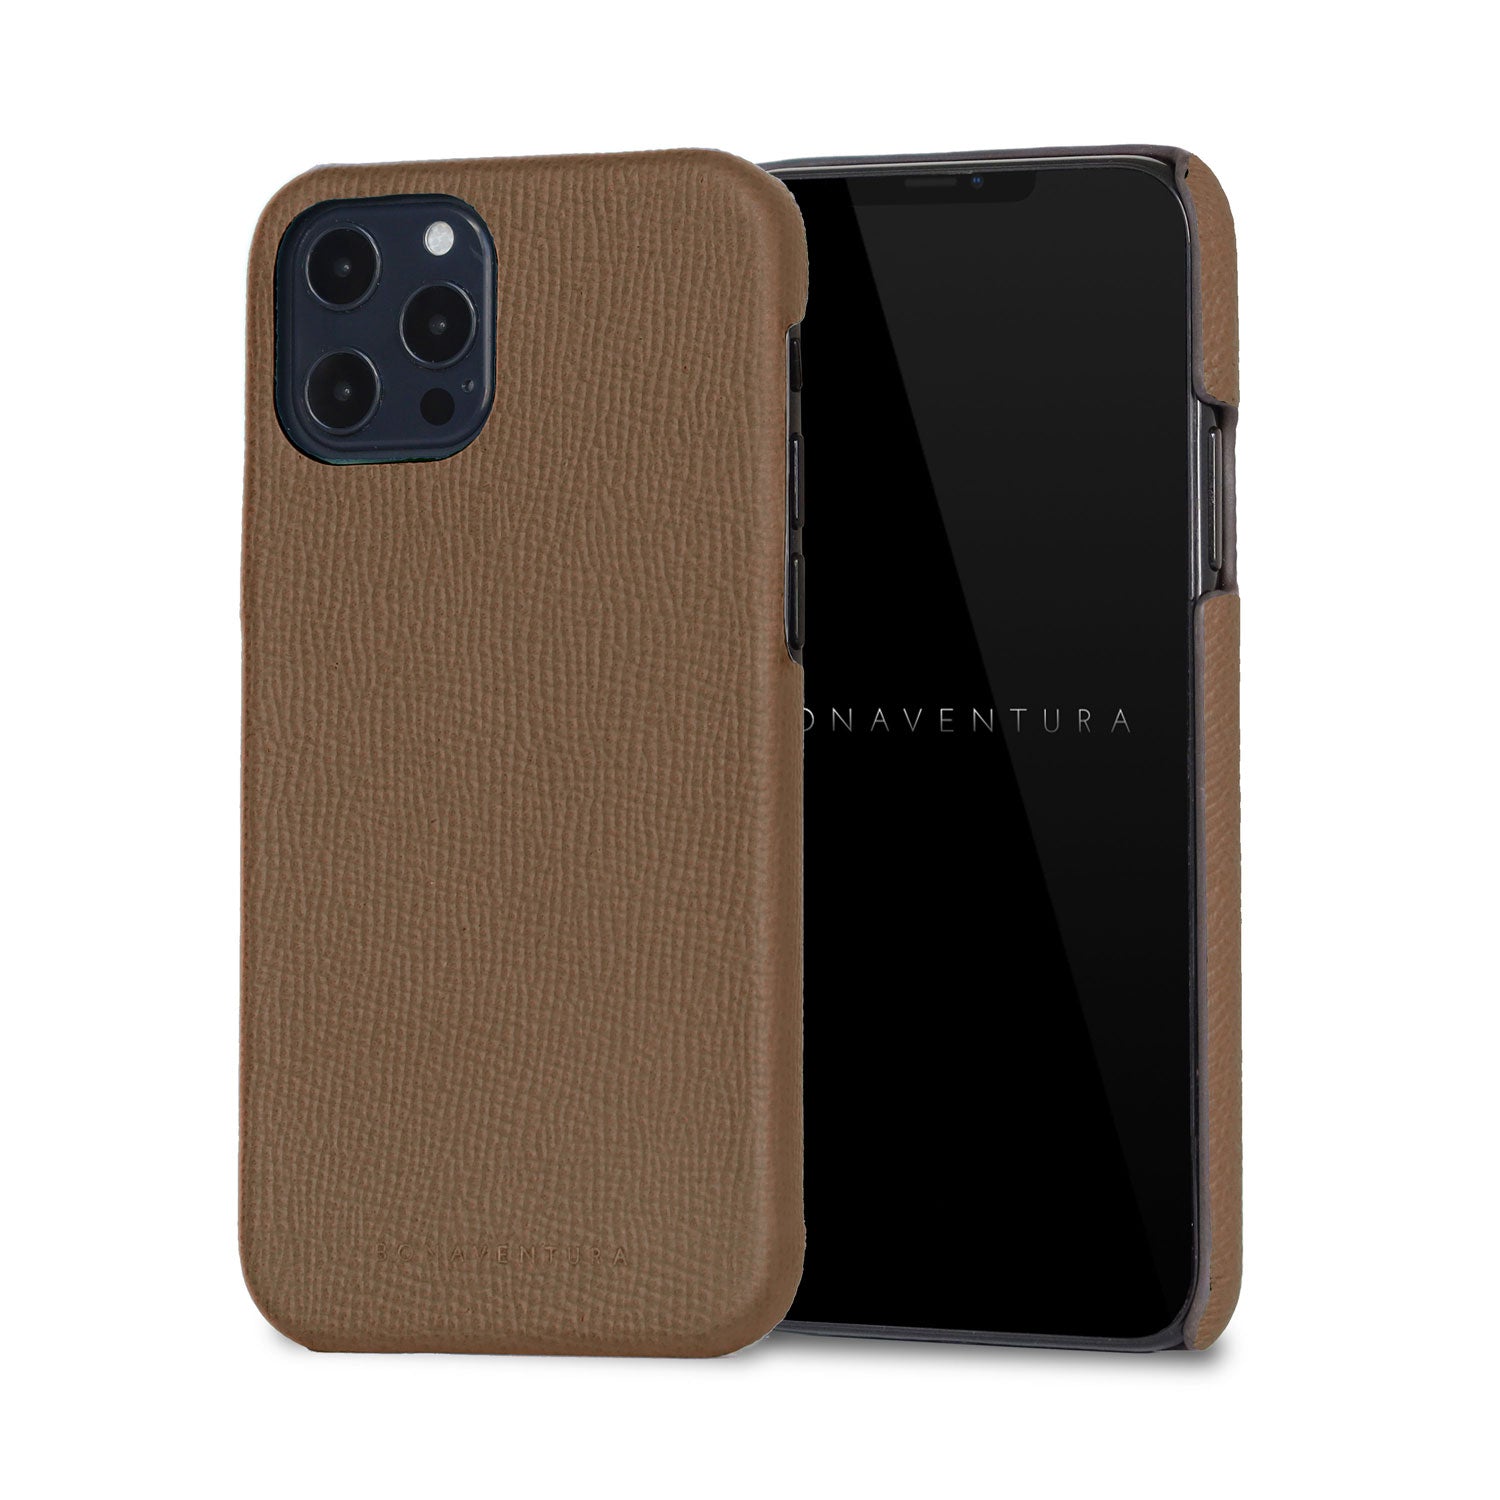 (iPhone 12 Pro Max) Back Cover Case Noblesse Leather